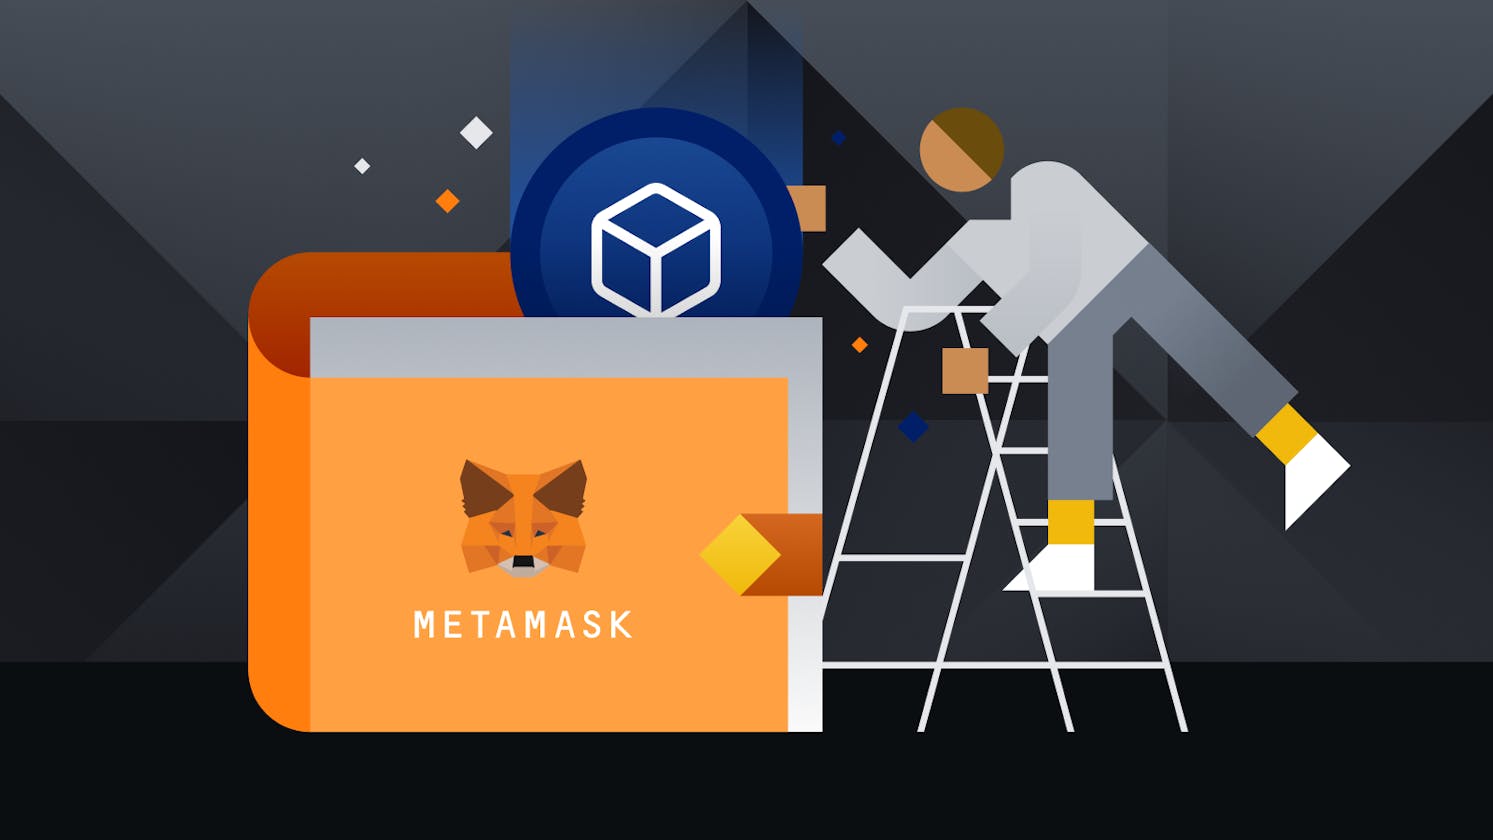 How to Add Fantom to MetaMask?